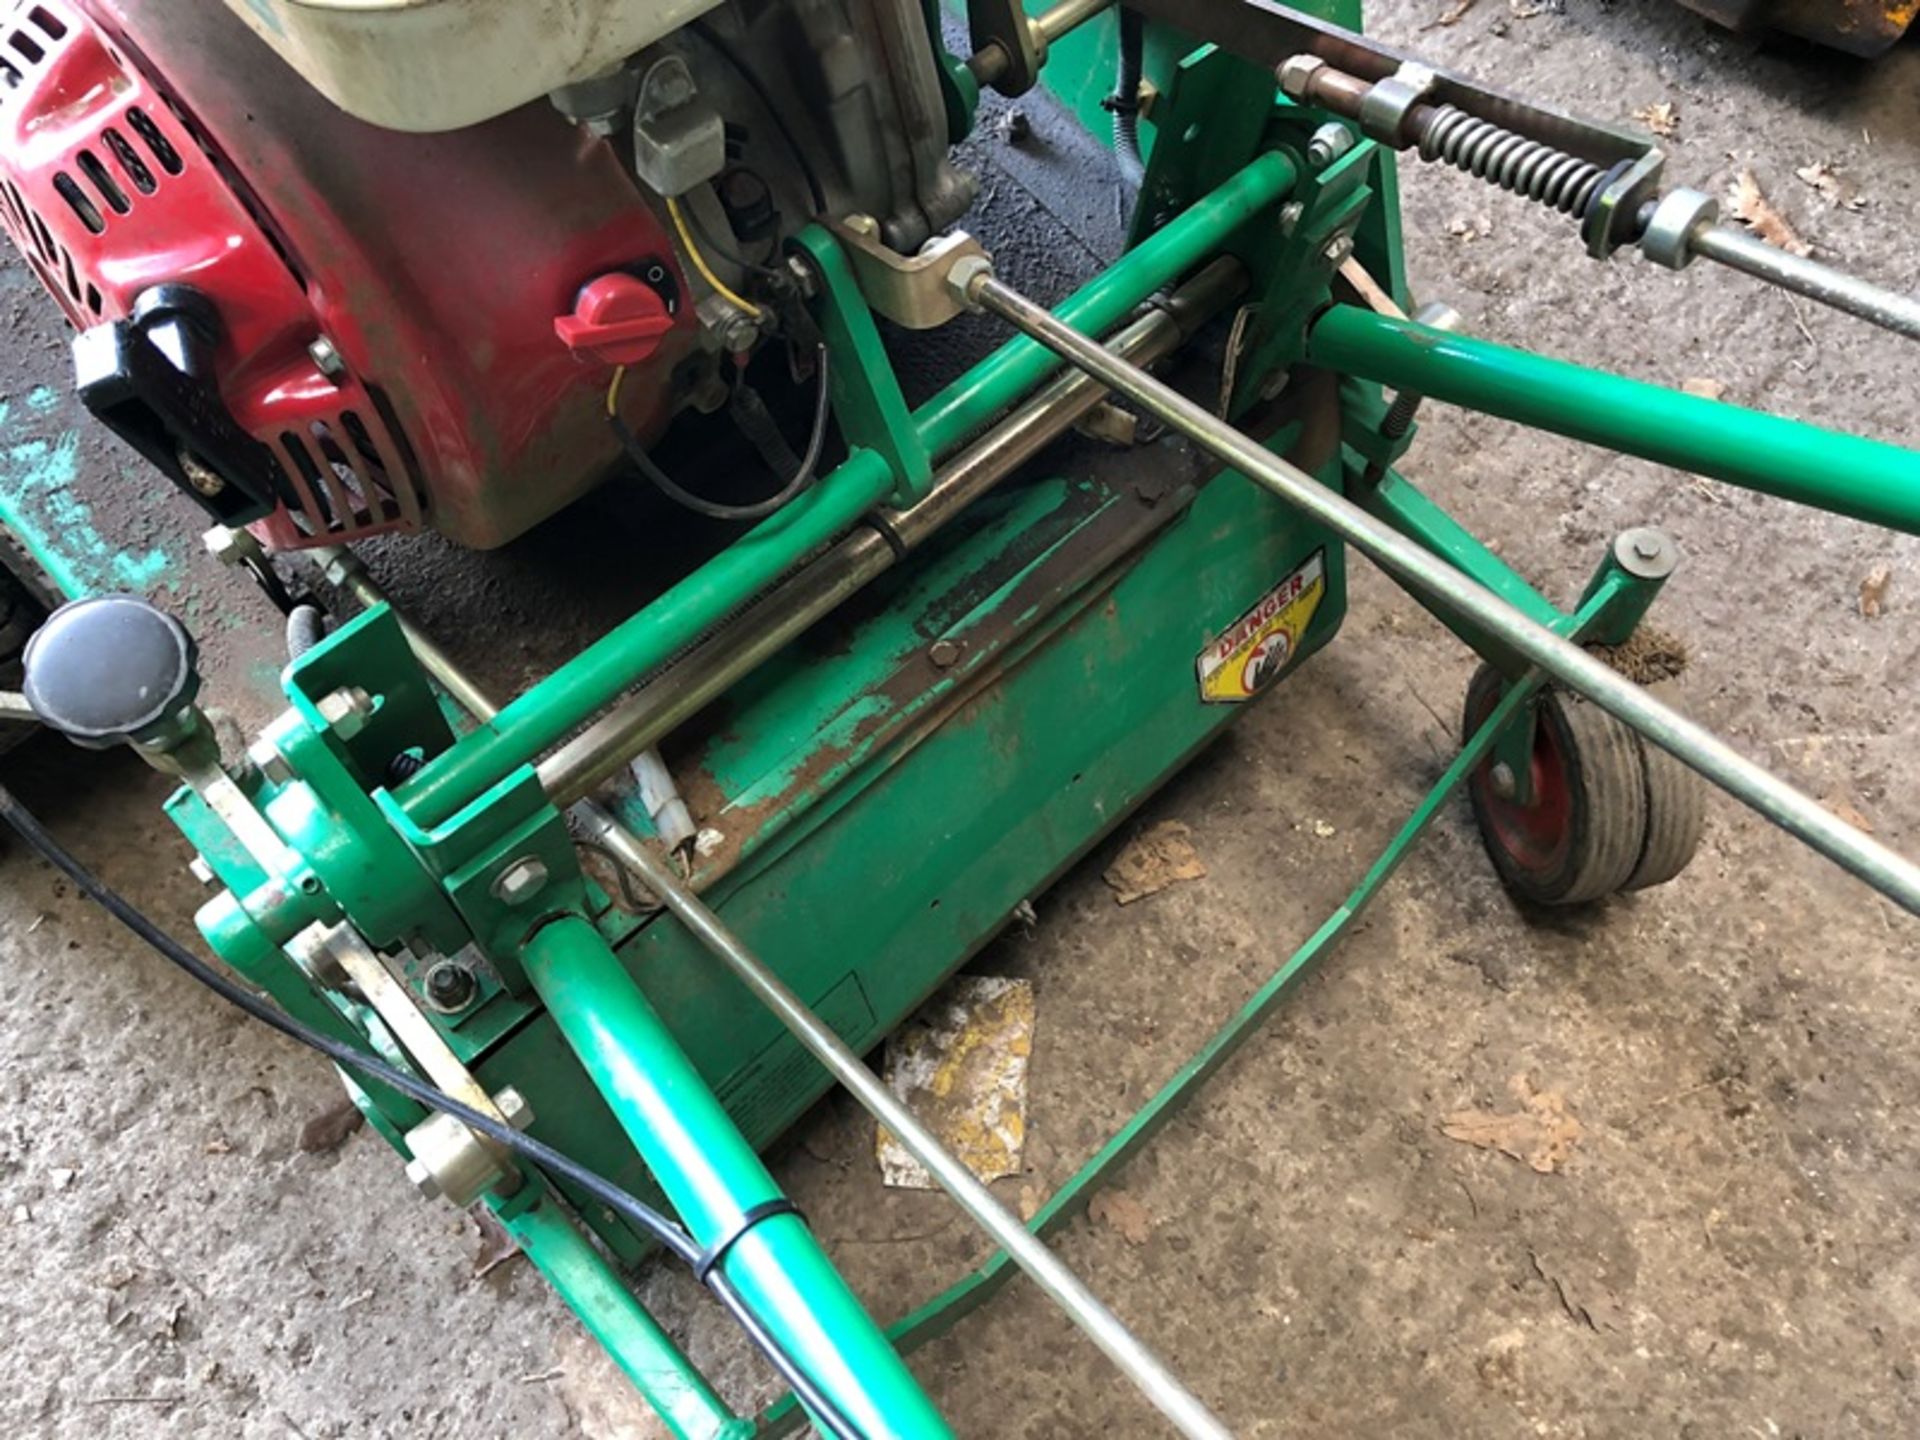 Graden Scarifier lawn aerator with Honda GX340 11.00 hp petrol engine (broken arms for spares or - Image 4 of 5